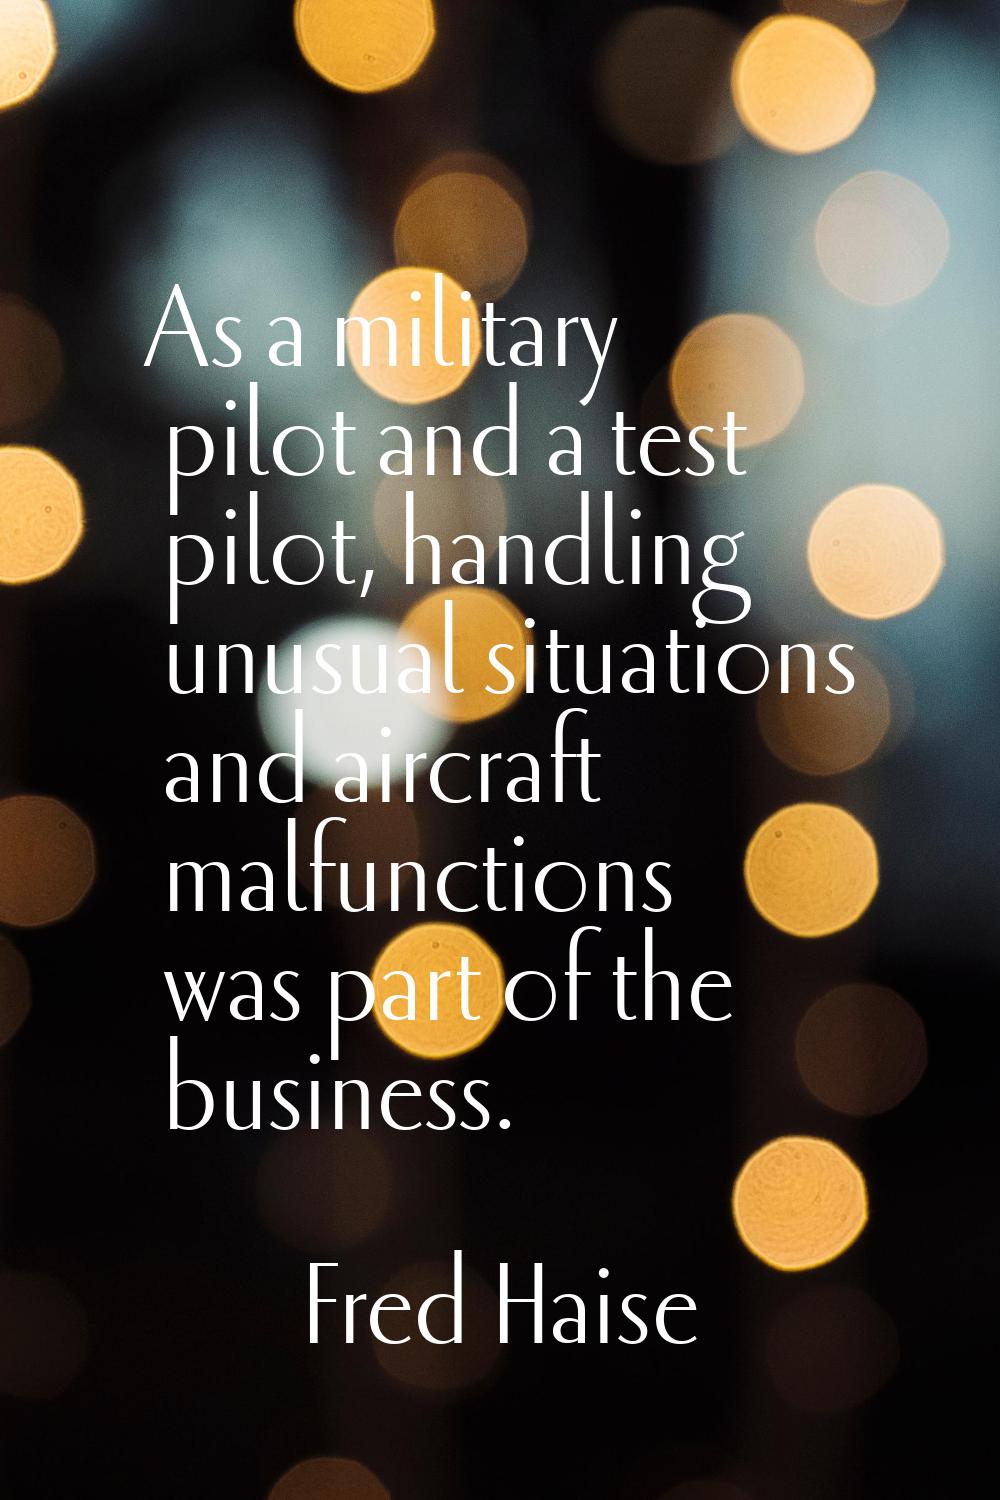 As a military pilot and a test pilot, handling unusual situations and aircraft malfunctions was par